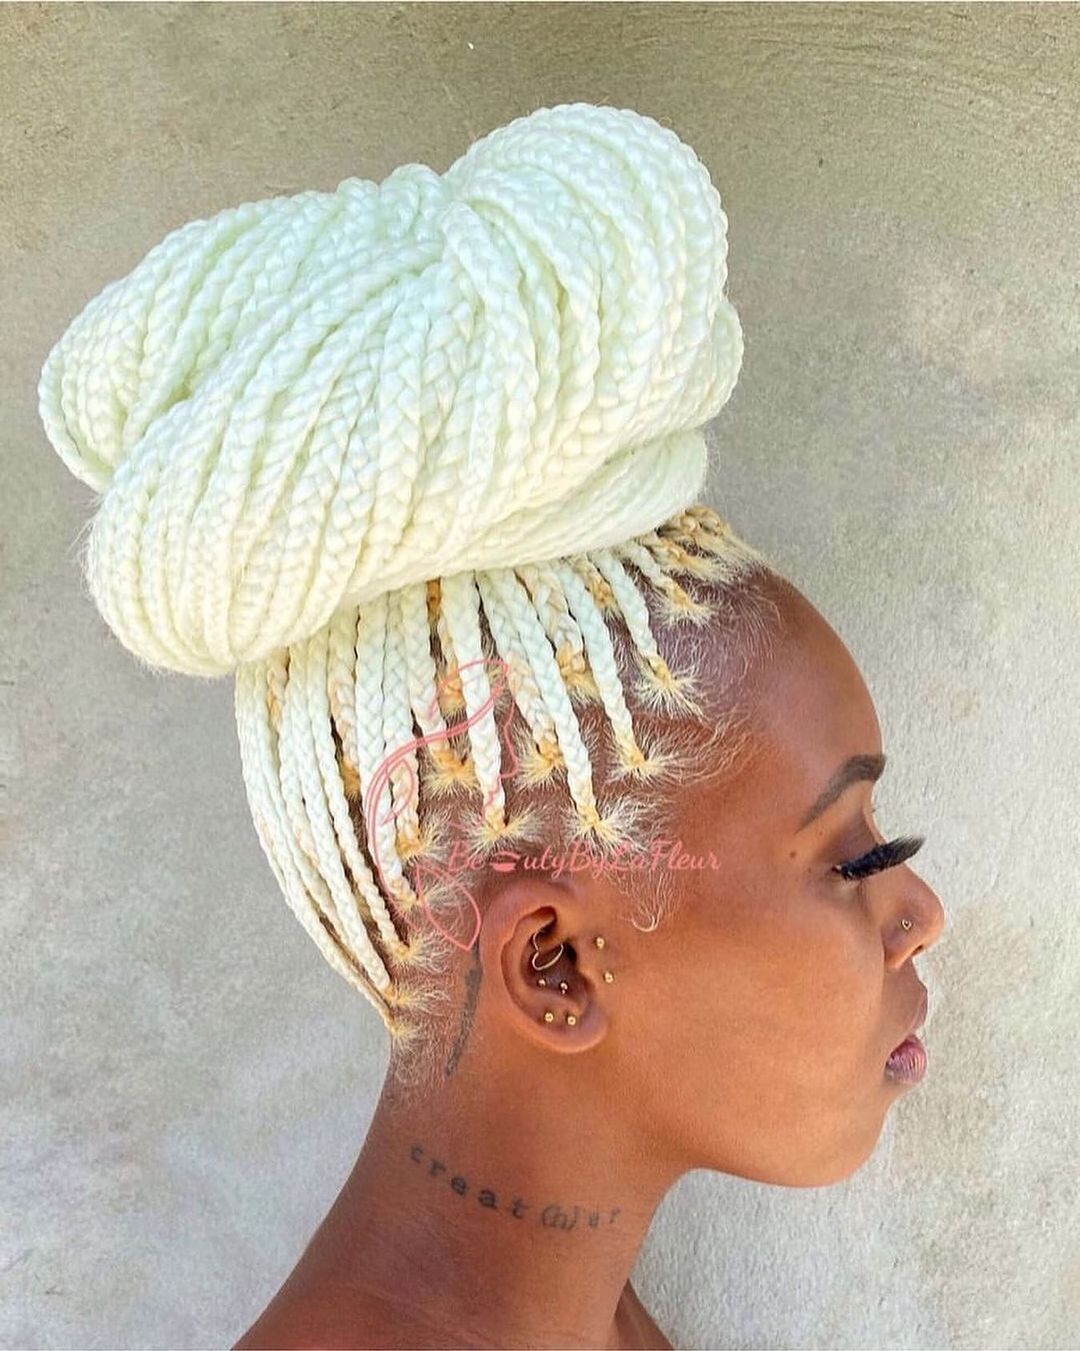 Updo Hairstyle for Black women 35 Black hair updo styles pictures | Black updo hairstyles with curls | black woman braids Updo Hairstyles for Black Women